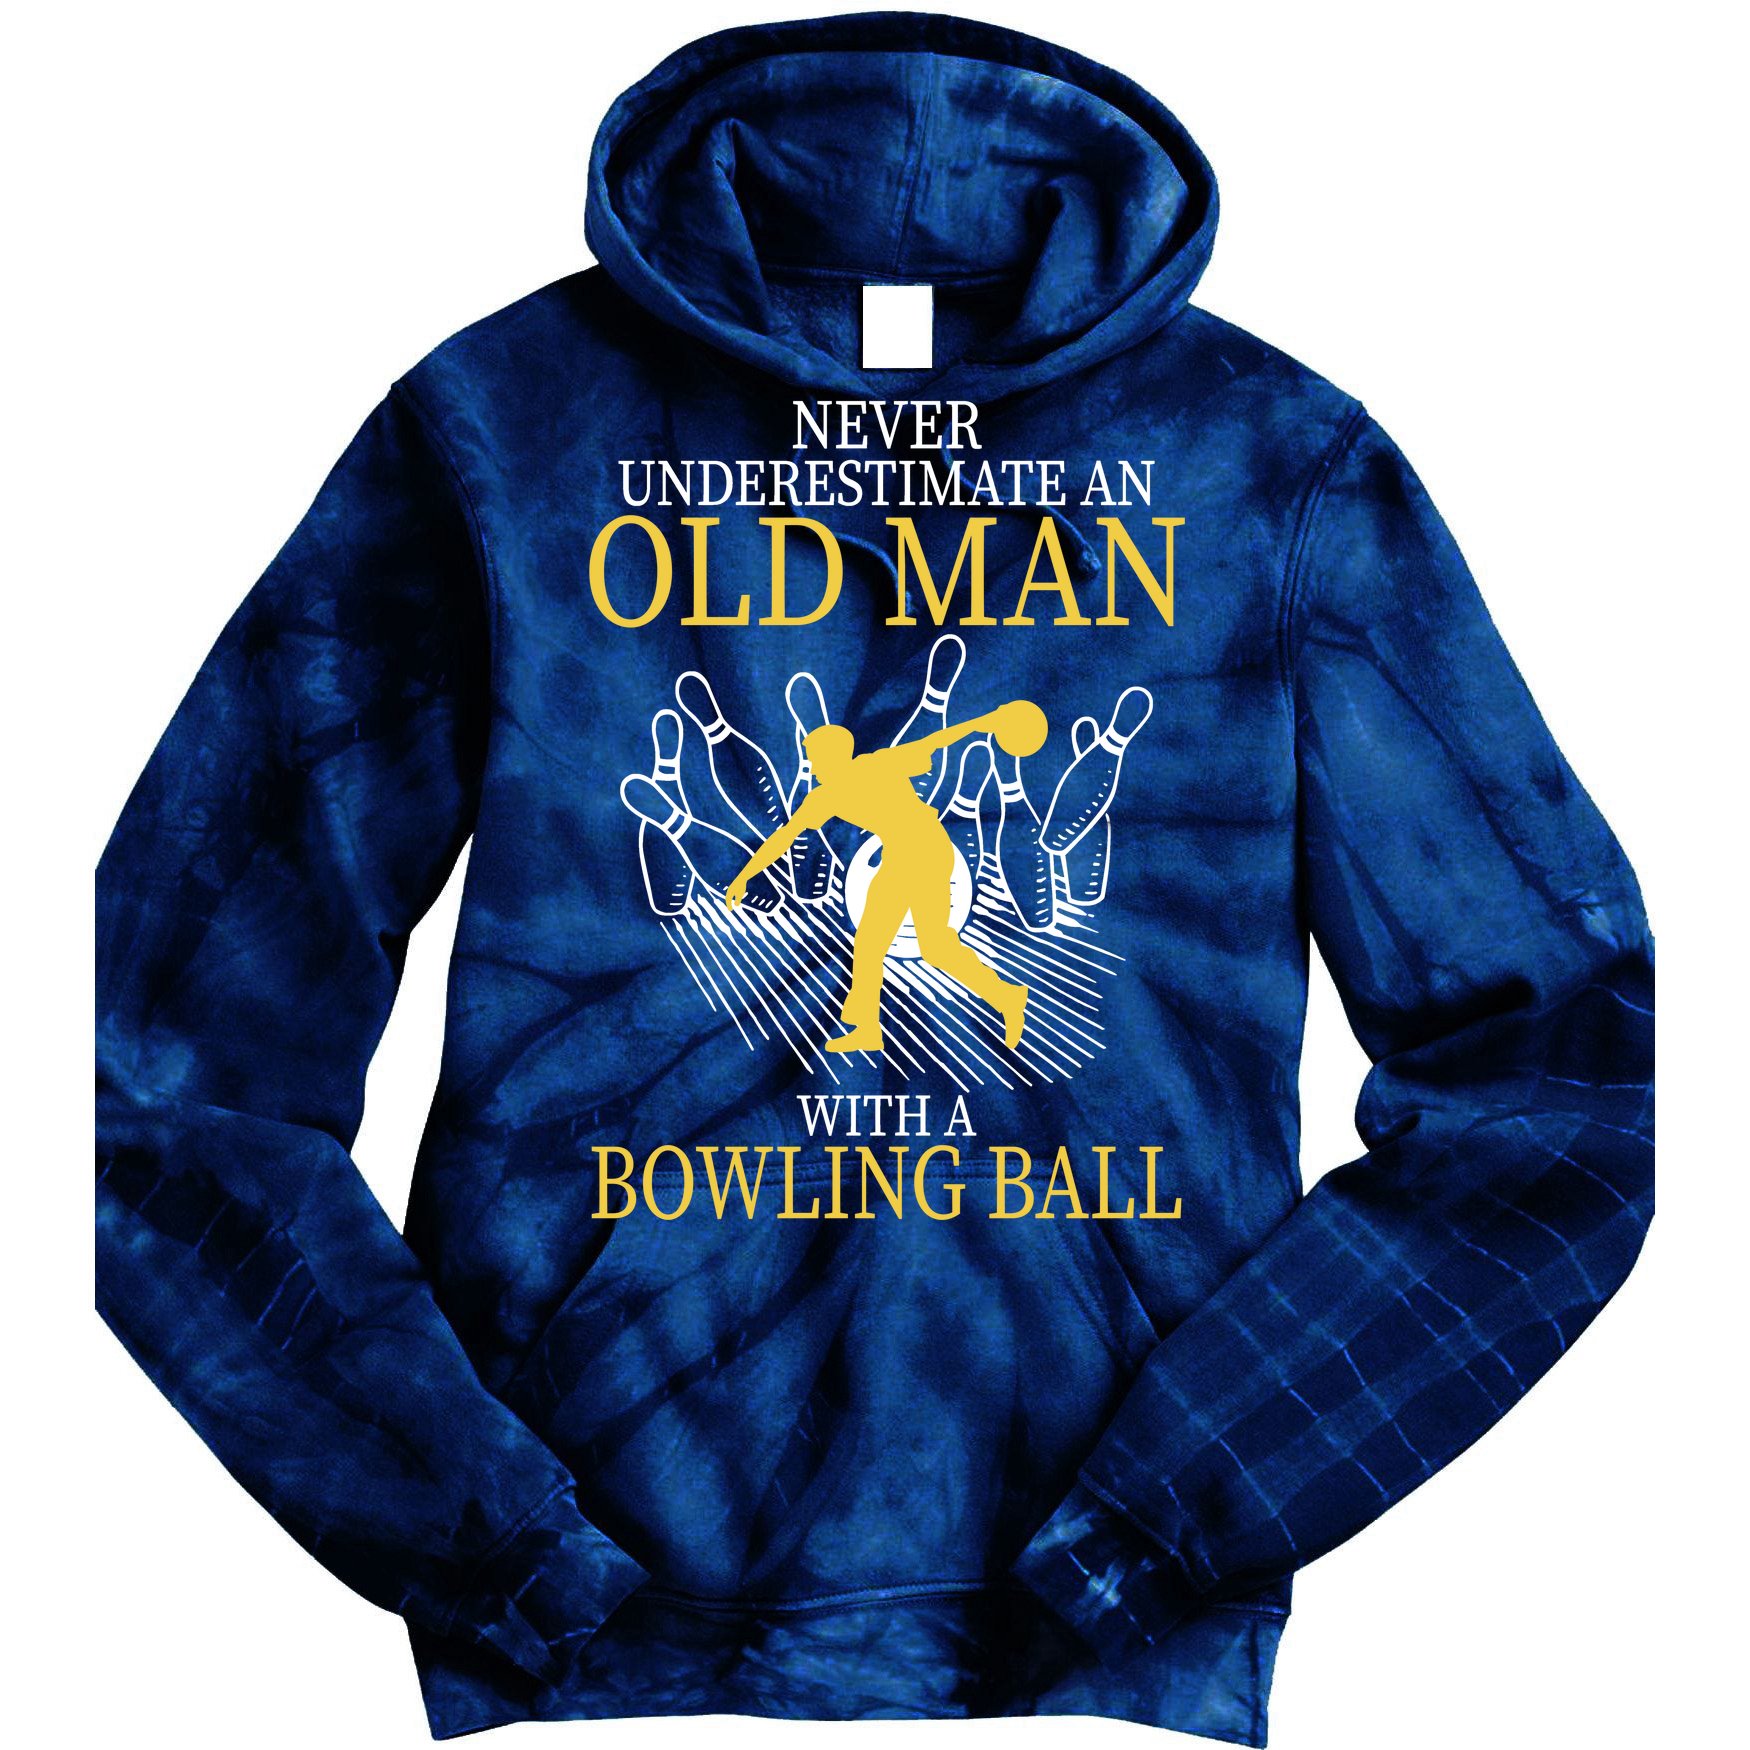 Details about   Never Underestimate an Old Man with a Bowling Ball Bowling Shirt 